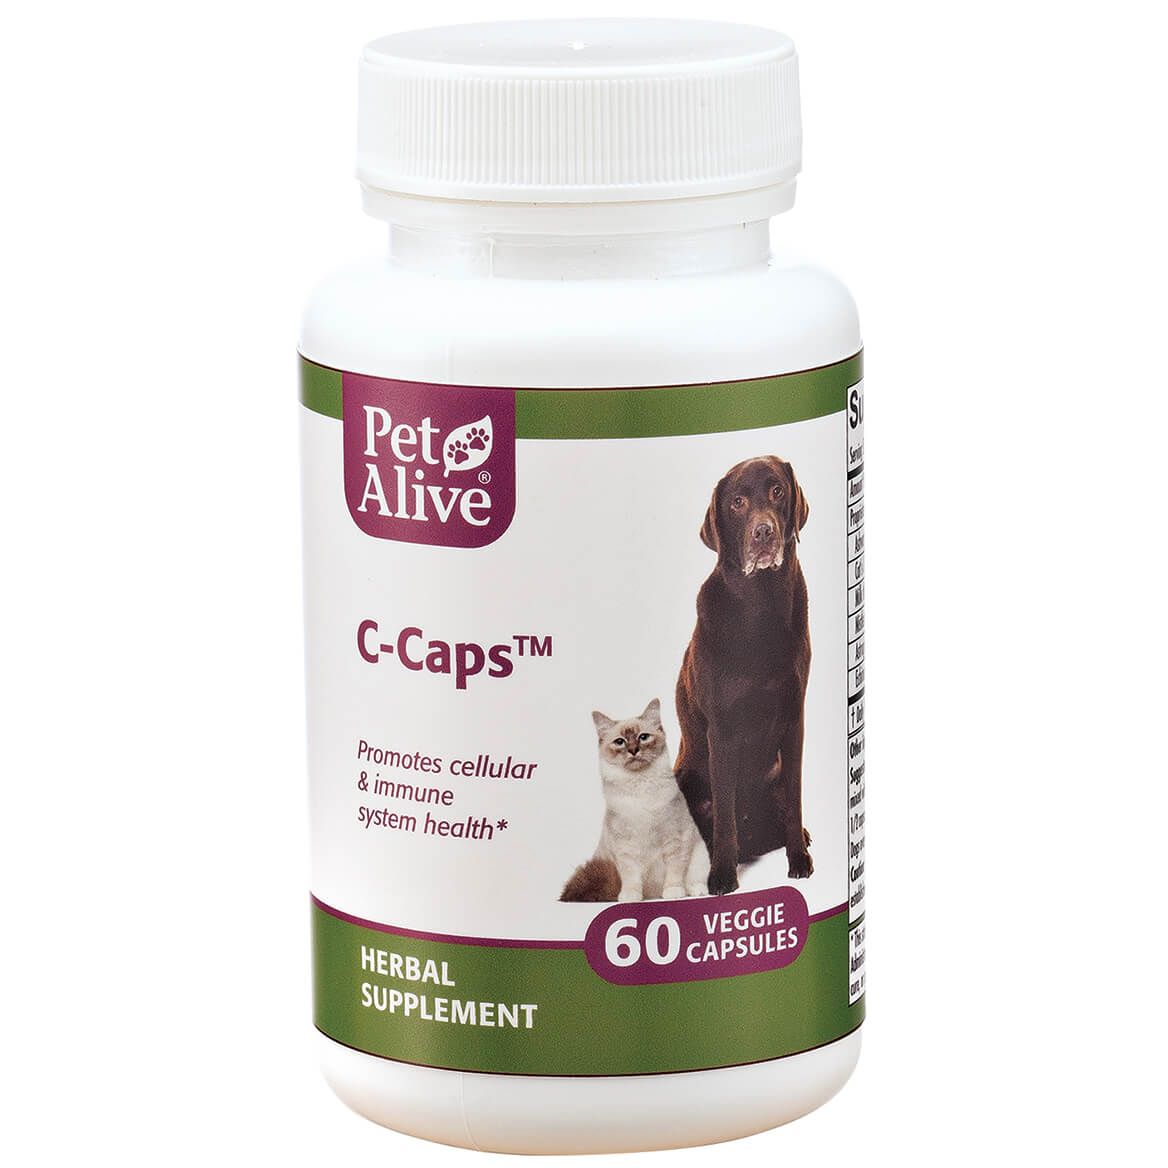 C-Caps™ for Complete Cellular health + '-' + 351588